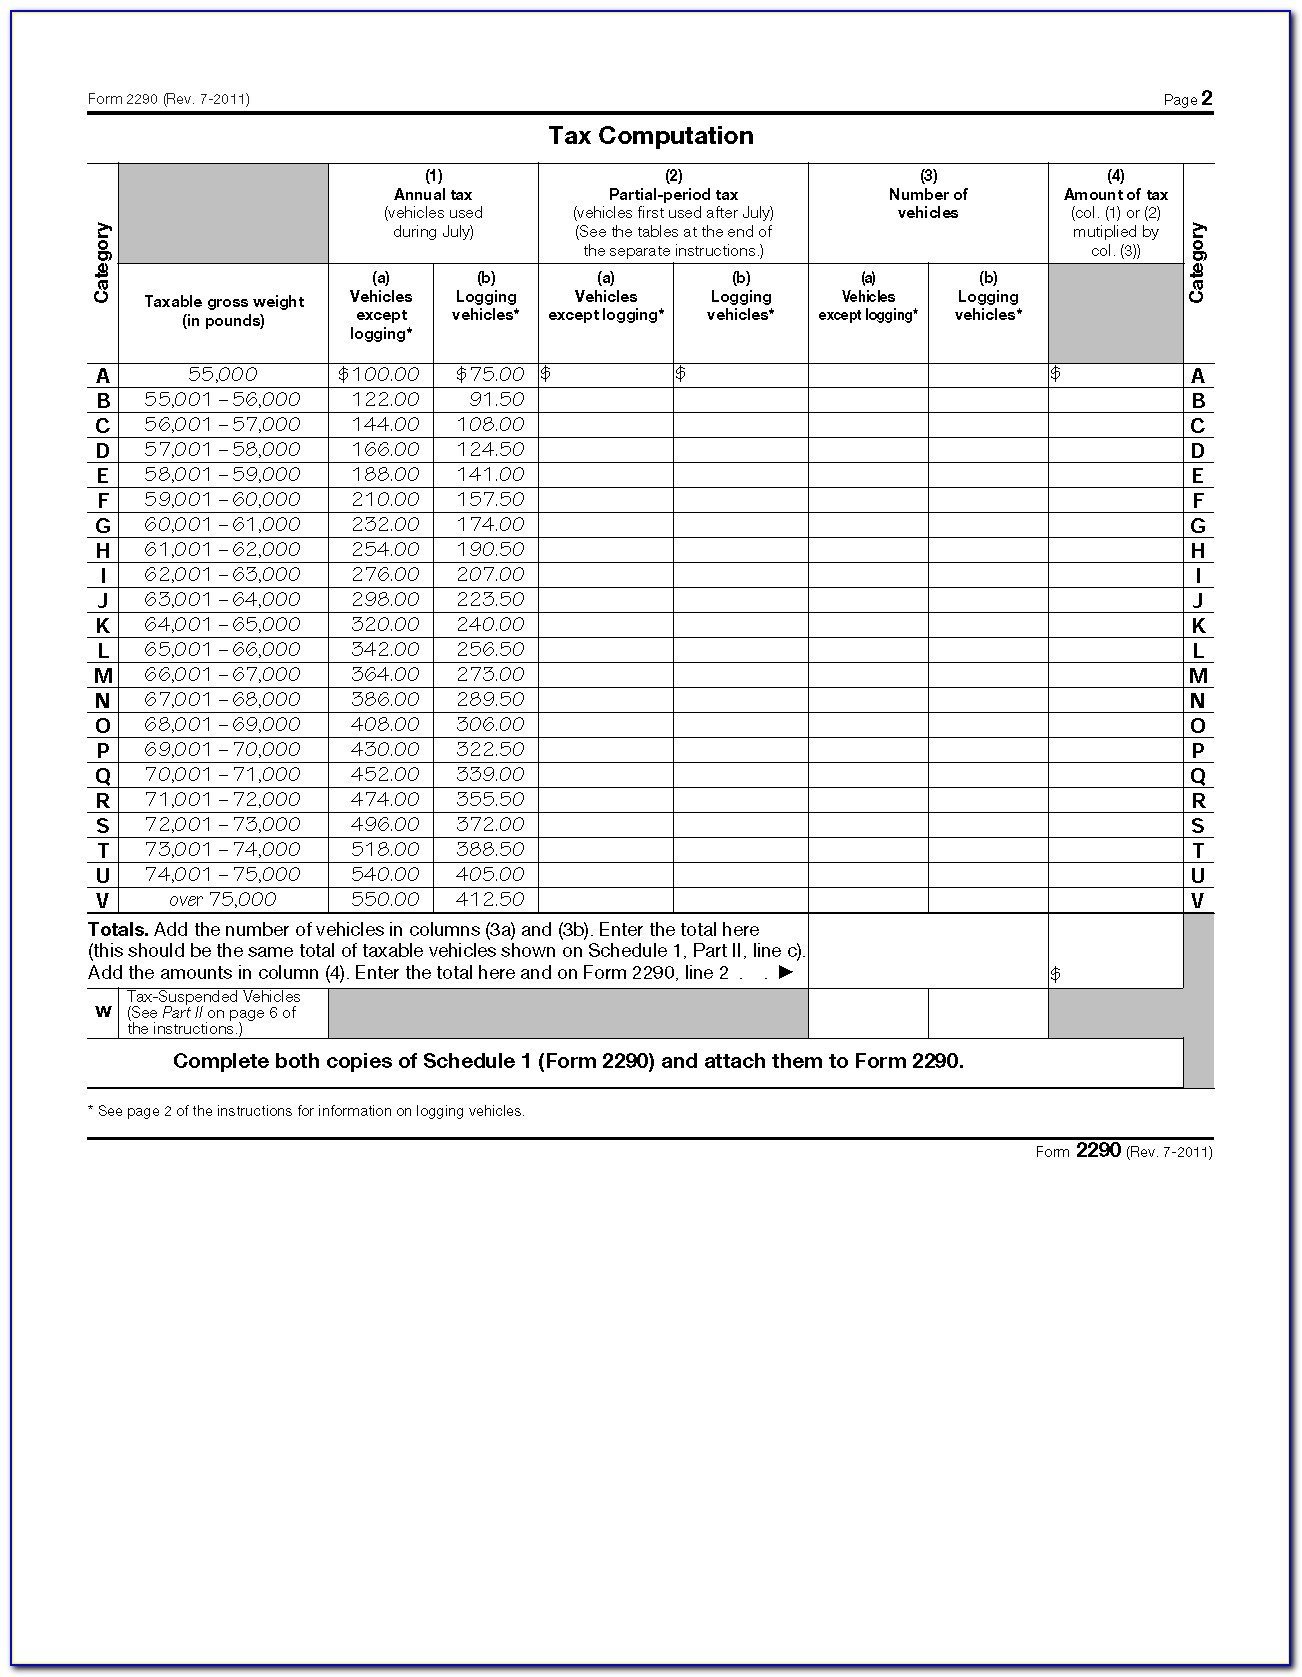 Irs Tax Form 2290 Instructions